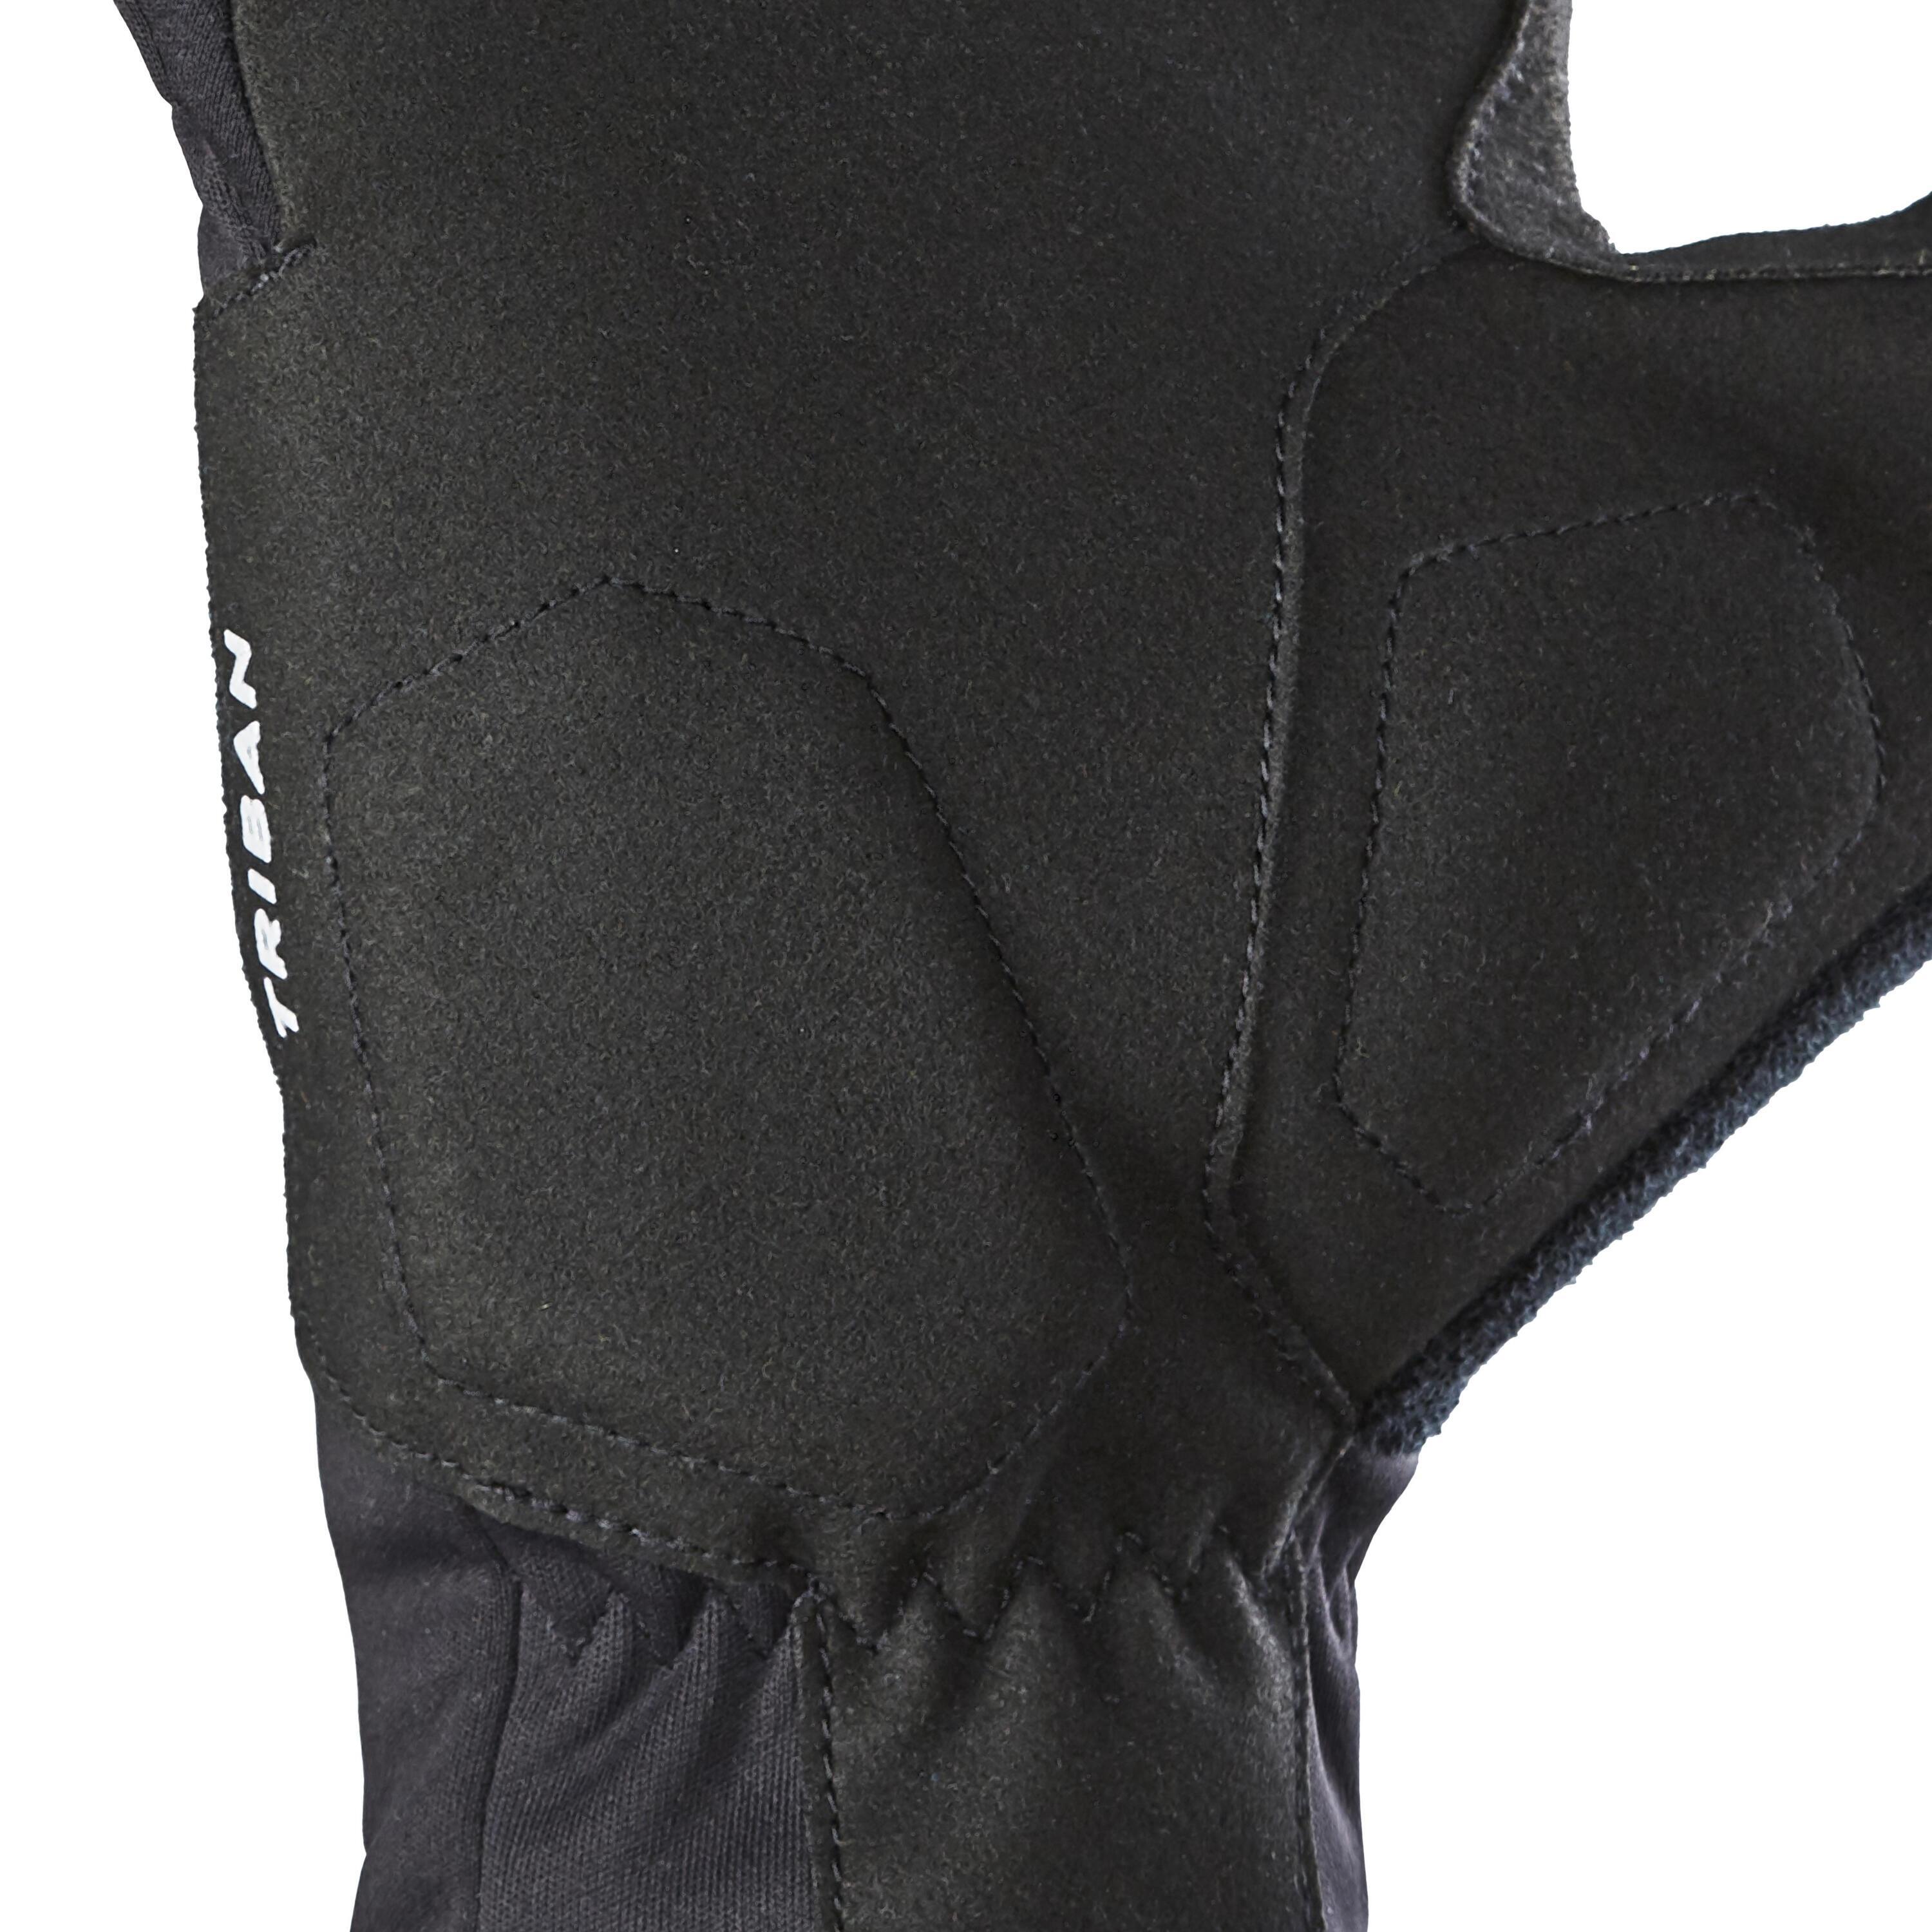 Refurbished Smartphone-compatible thermal cycling gloves - Black - A Grade 4/6